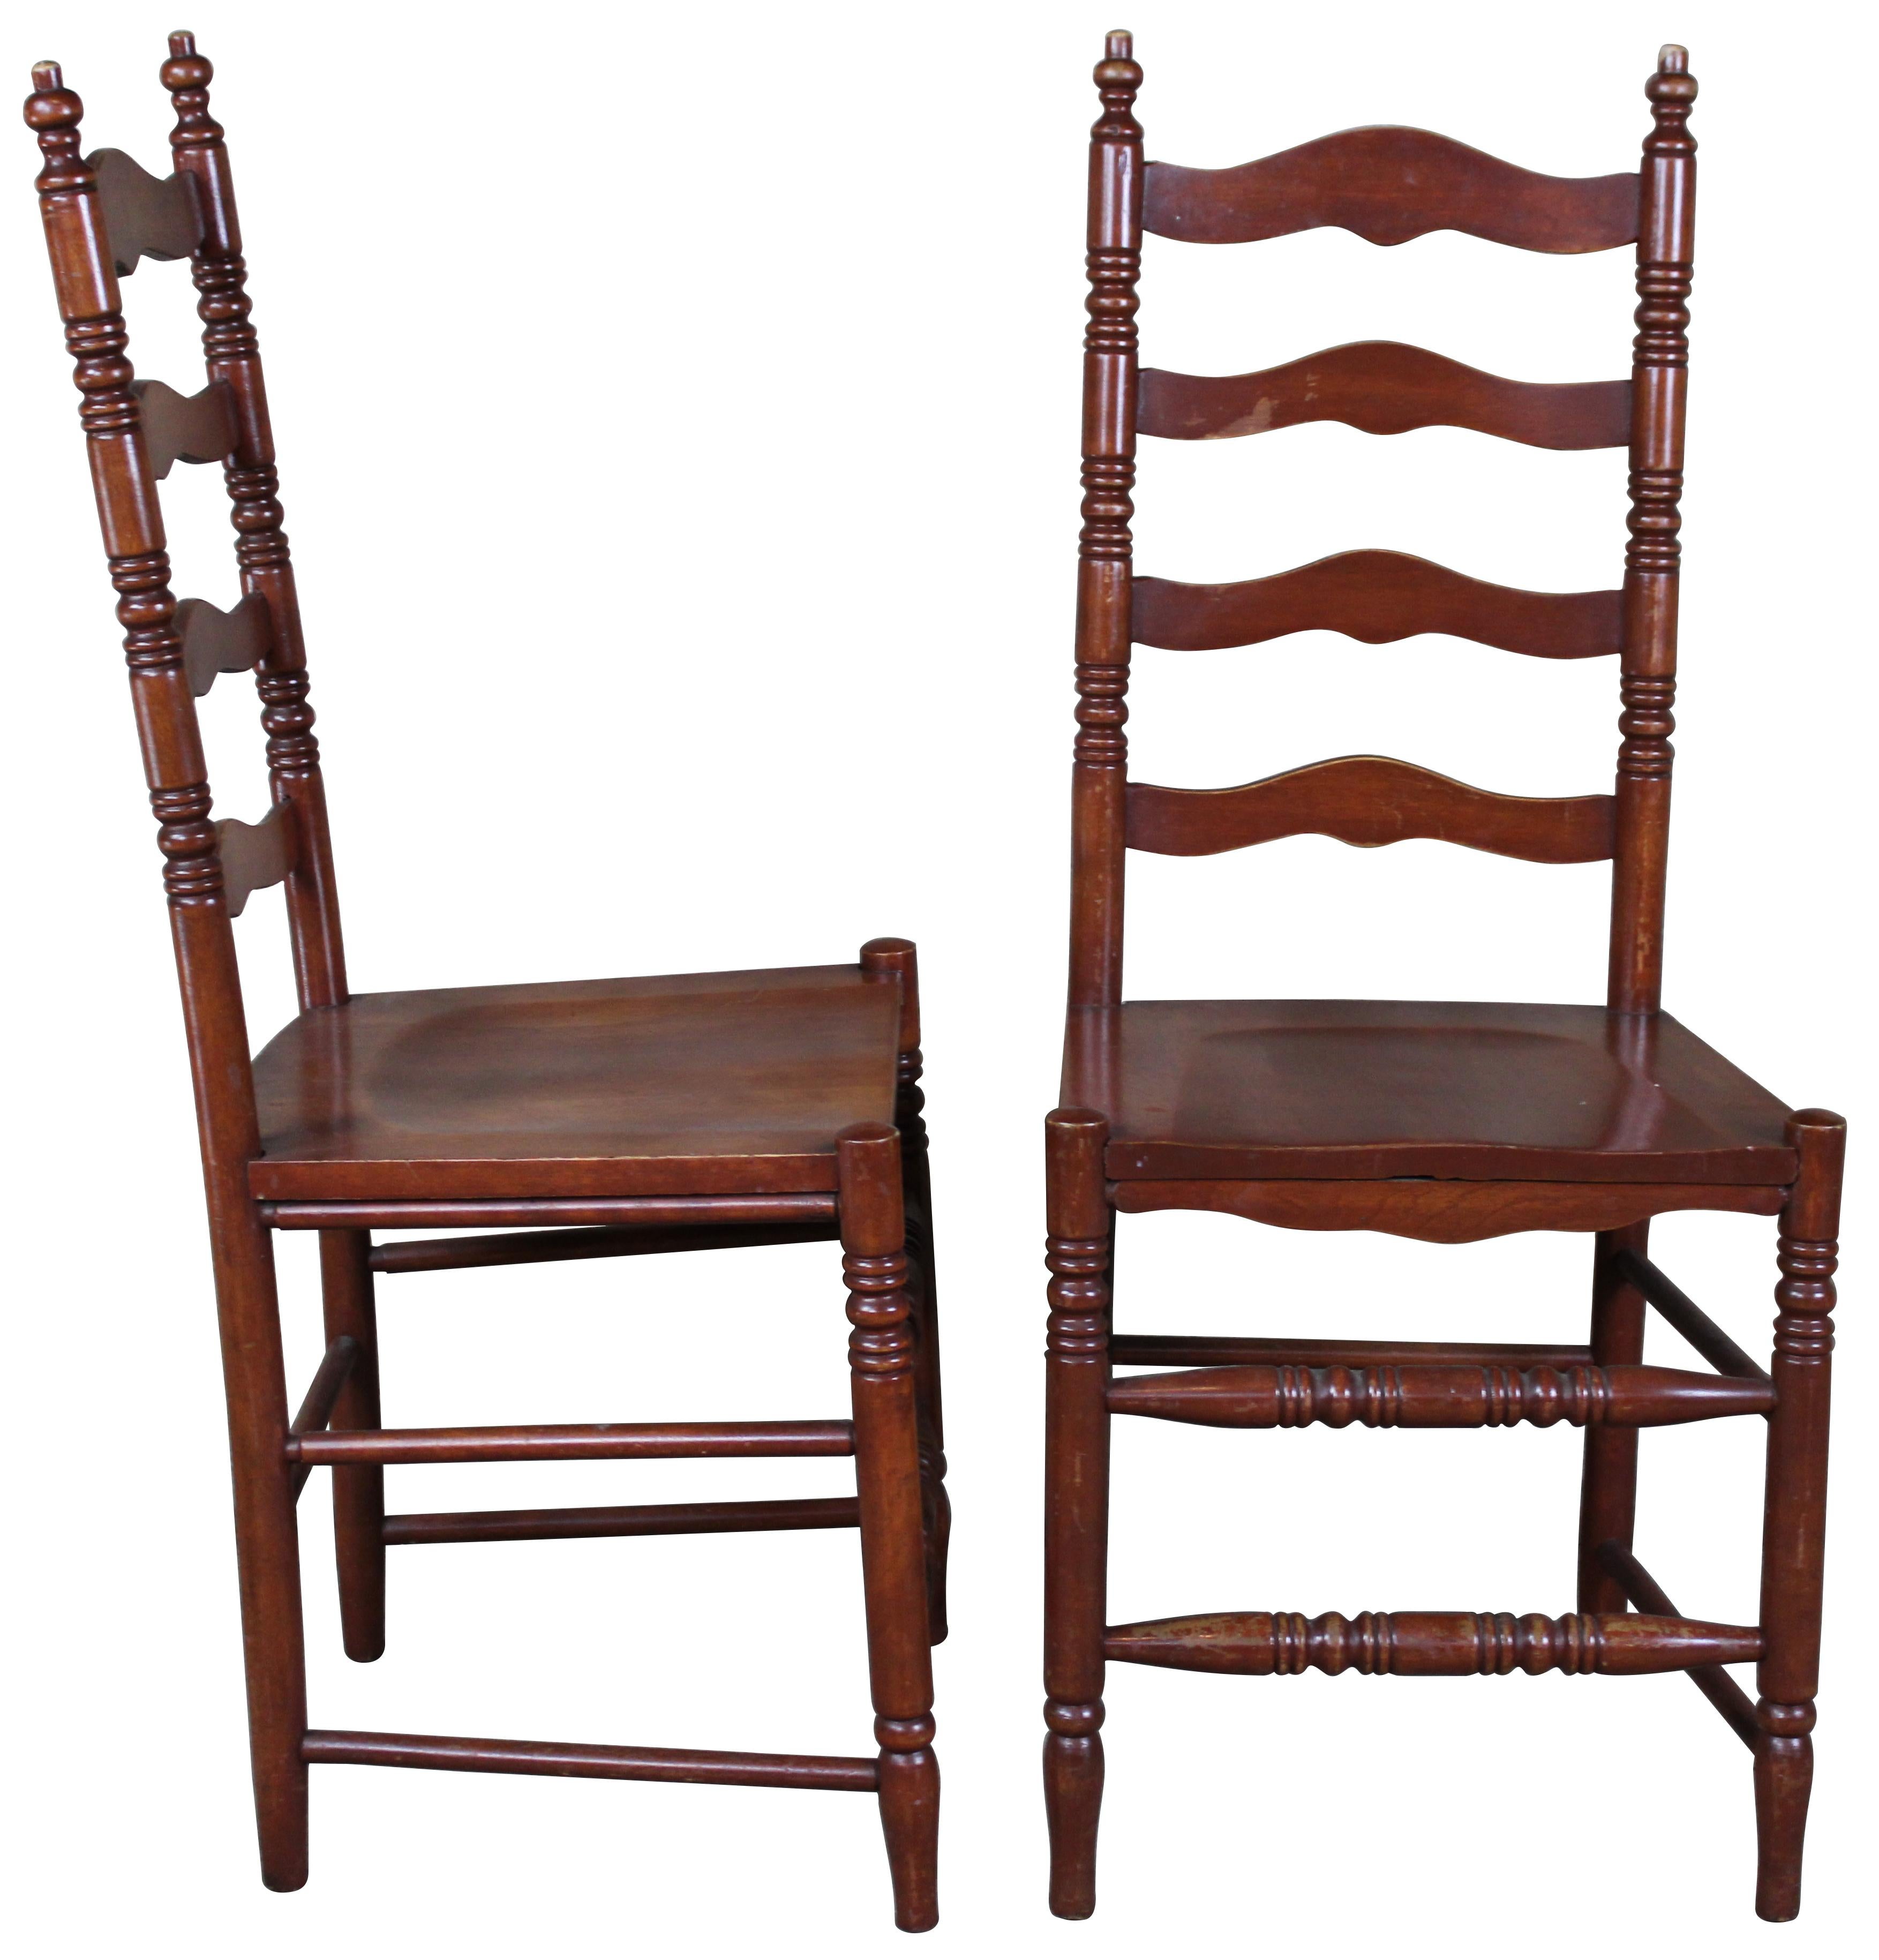 Four vintage Shaker style ladder back dining chairs. Made of maple, featuring classic turned legs and supports.
 